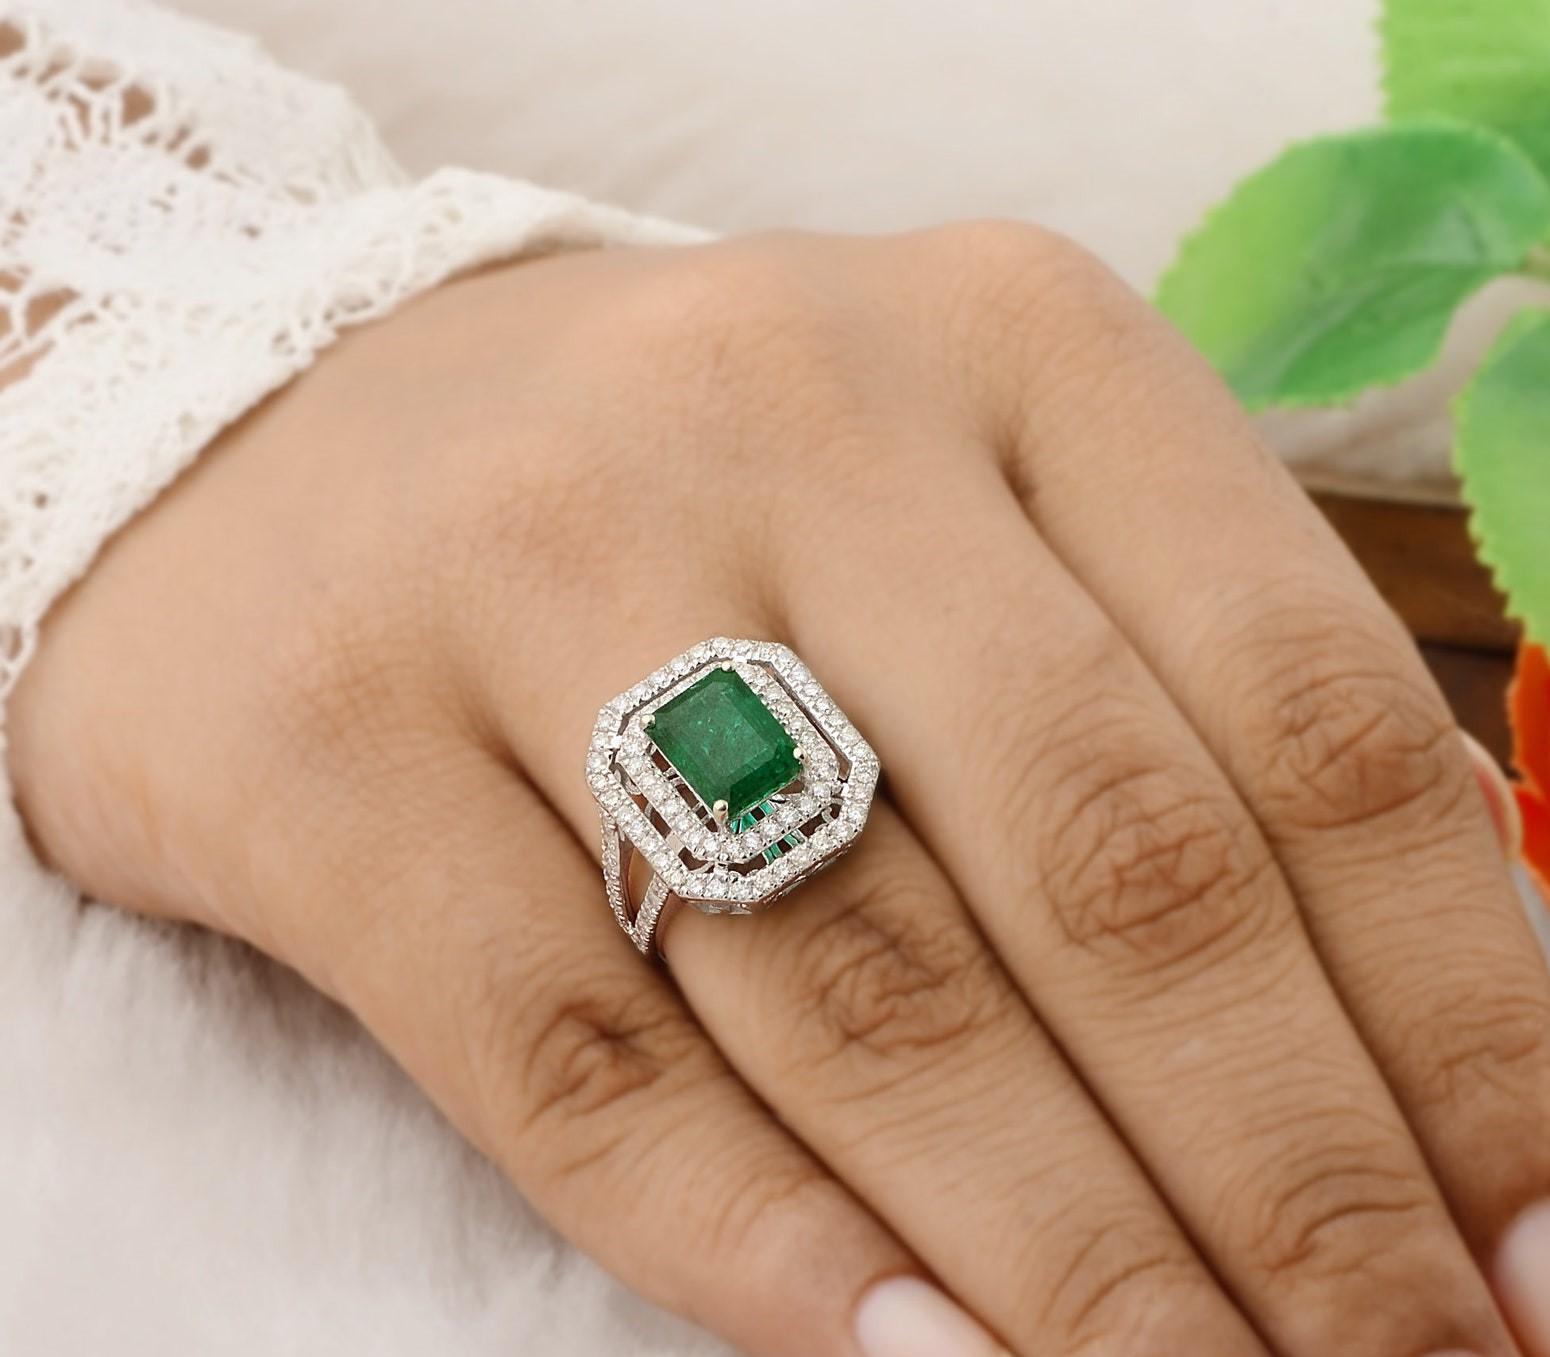 This ring has been meticulously crafted from 10-karat gold.  It is hand set with 2.58 carats emerald & 1.12 carats of sparkling diamonds. 

The ring is a size 7 and may be resized to larger or smaller upon request. 
FOLLOW  MEGHNA JEWELS storefront